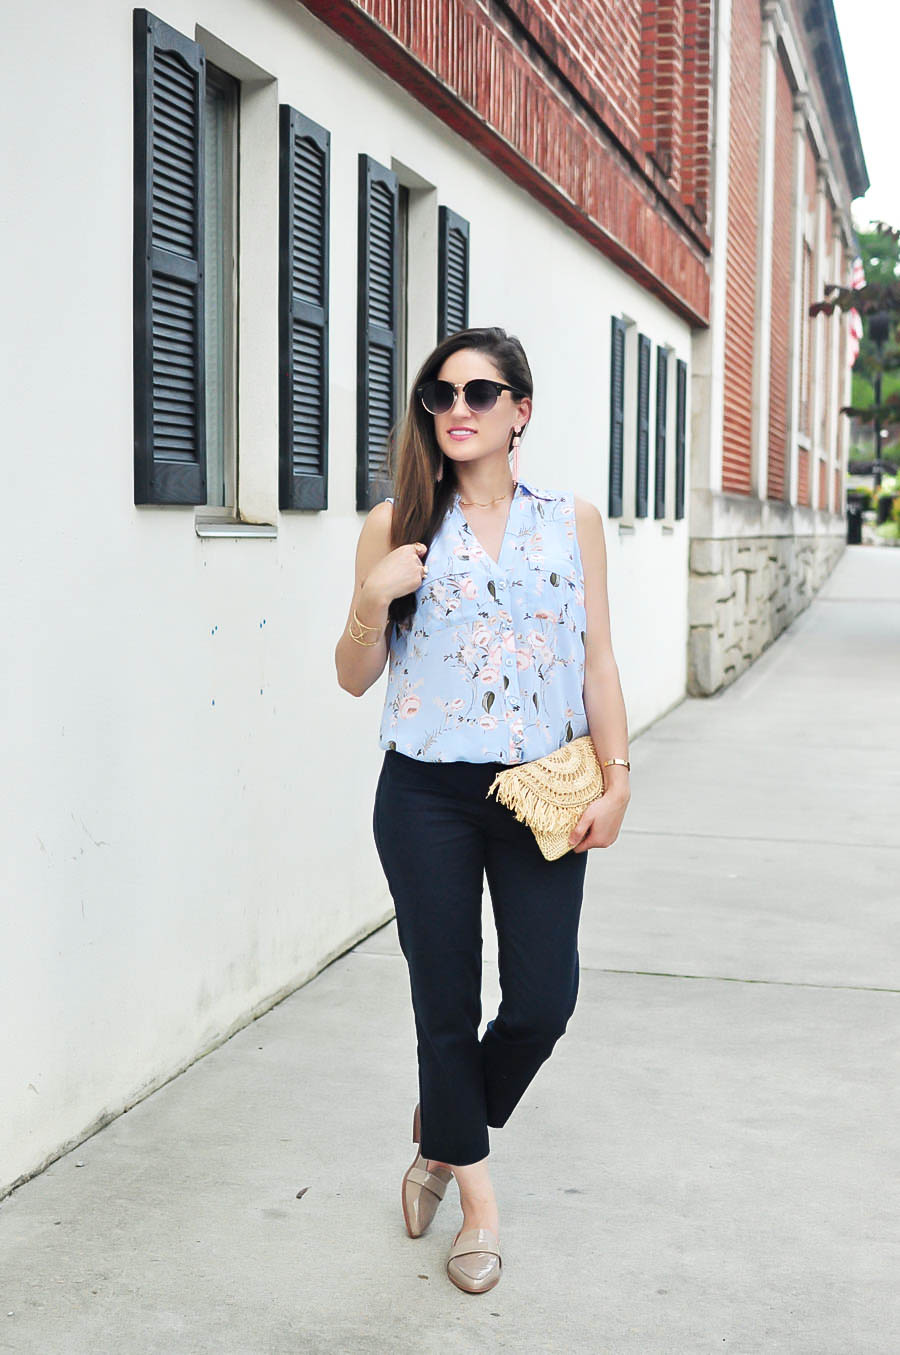 Office Style - by Fashion and Style Blogger Erica Valentin